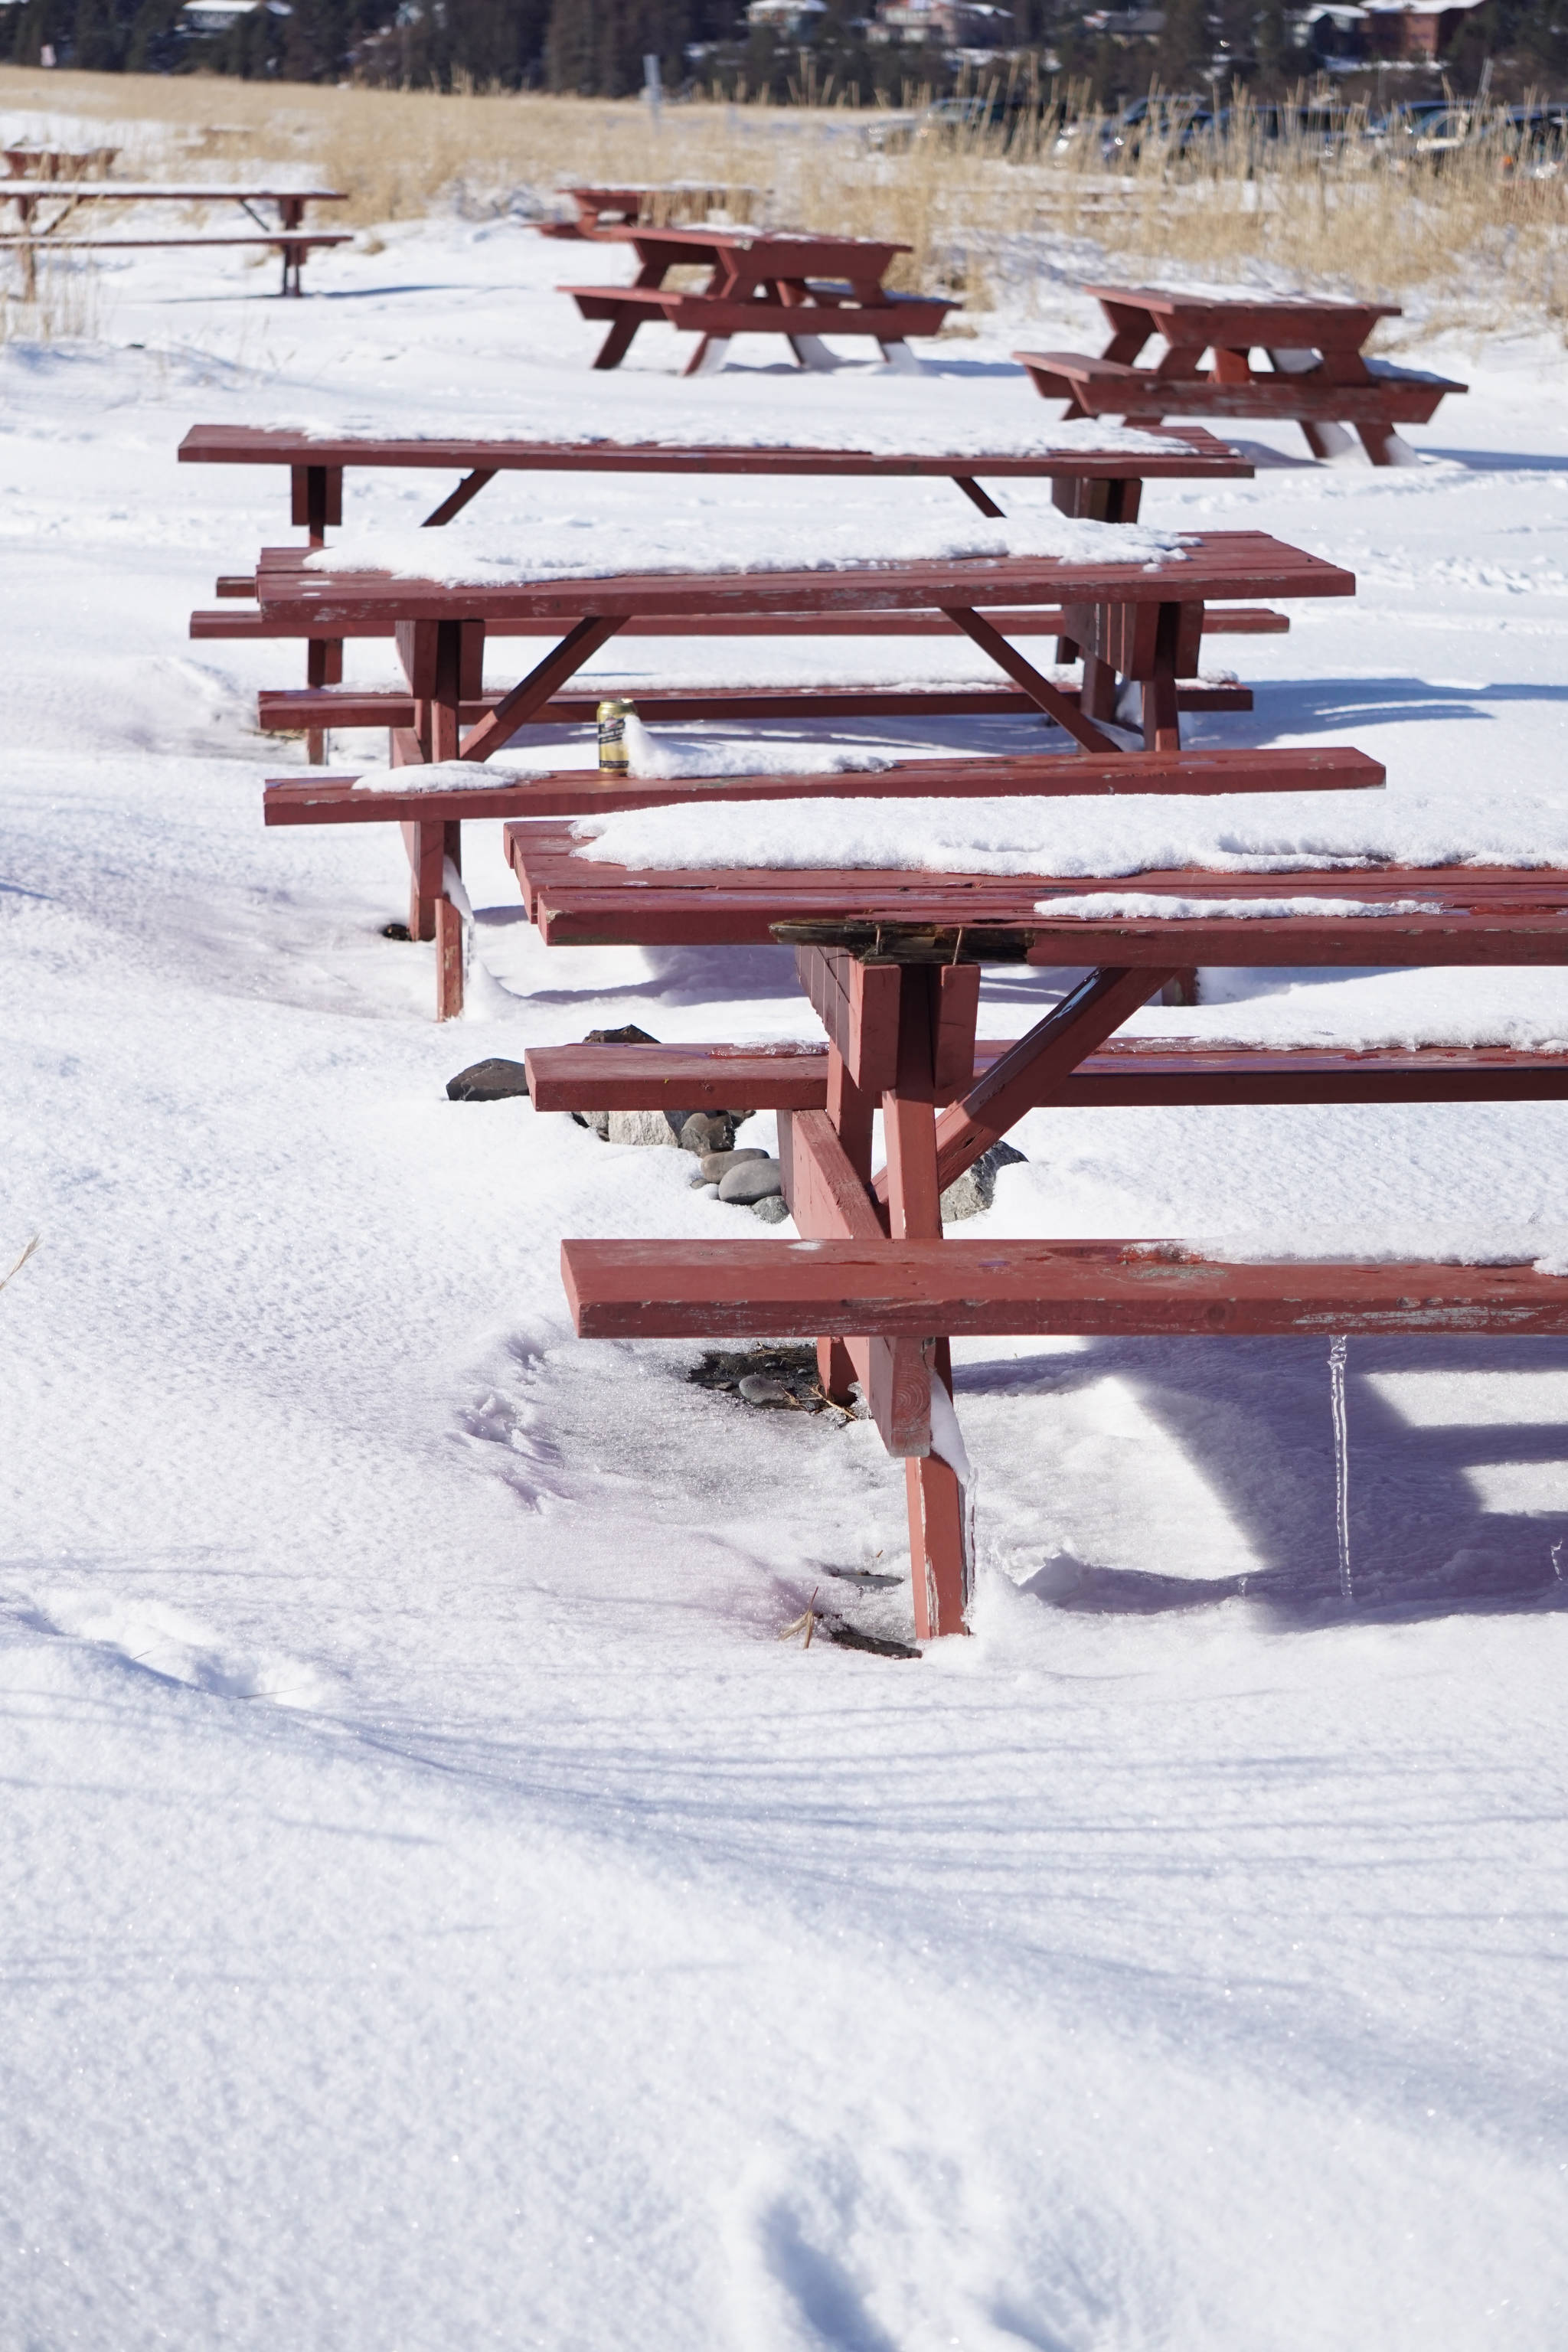 Fresh snow covers picnic tables at Mariner Park Campground on the Homer Spit, Alaska, on Sunday, March 11, 2018. (Photo by Michael Armstrong, Homer News)